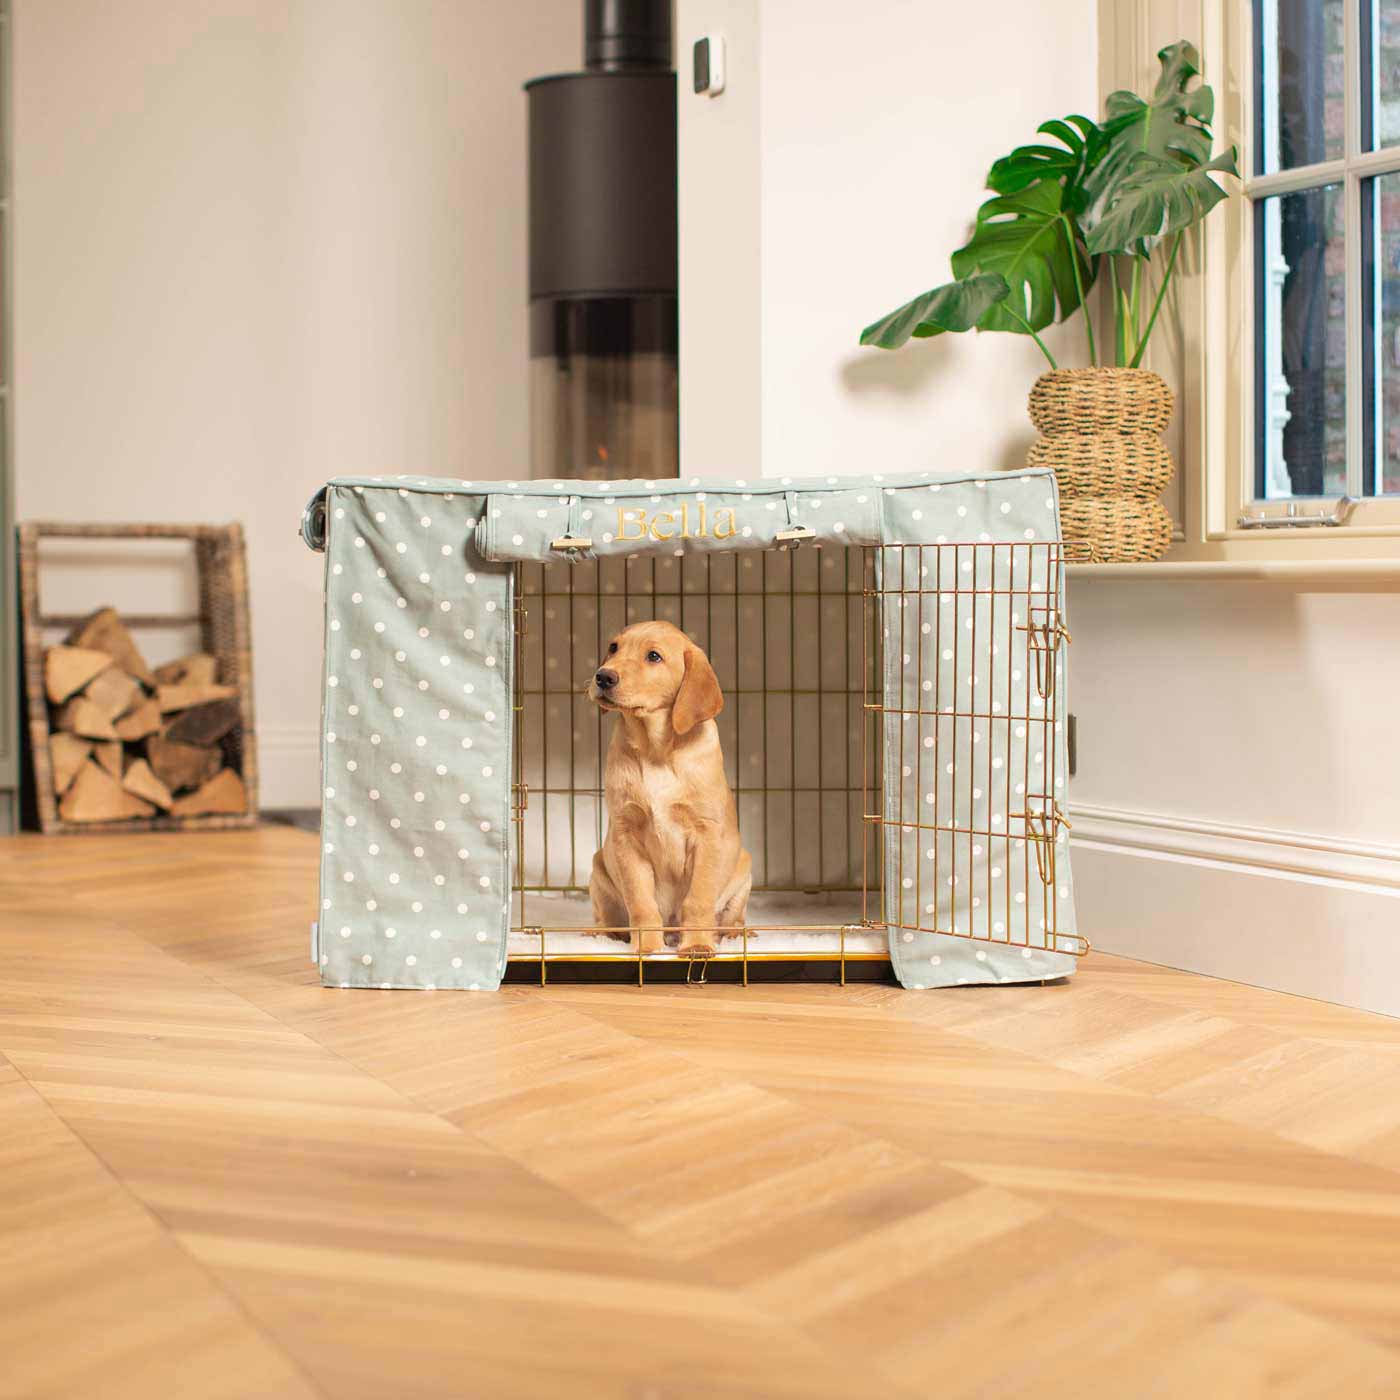 Luxury Dog Crate Cover, Duck Egg Spot Cotton Crate Cover The Perfect Dog Crate Accessory, Available To Personalise Now at Lords & Labradors